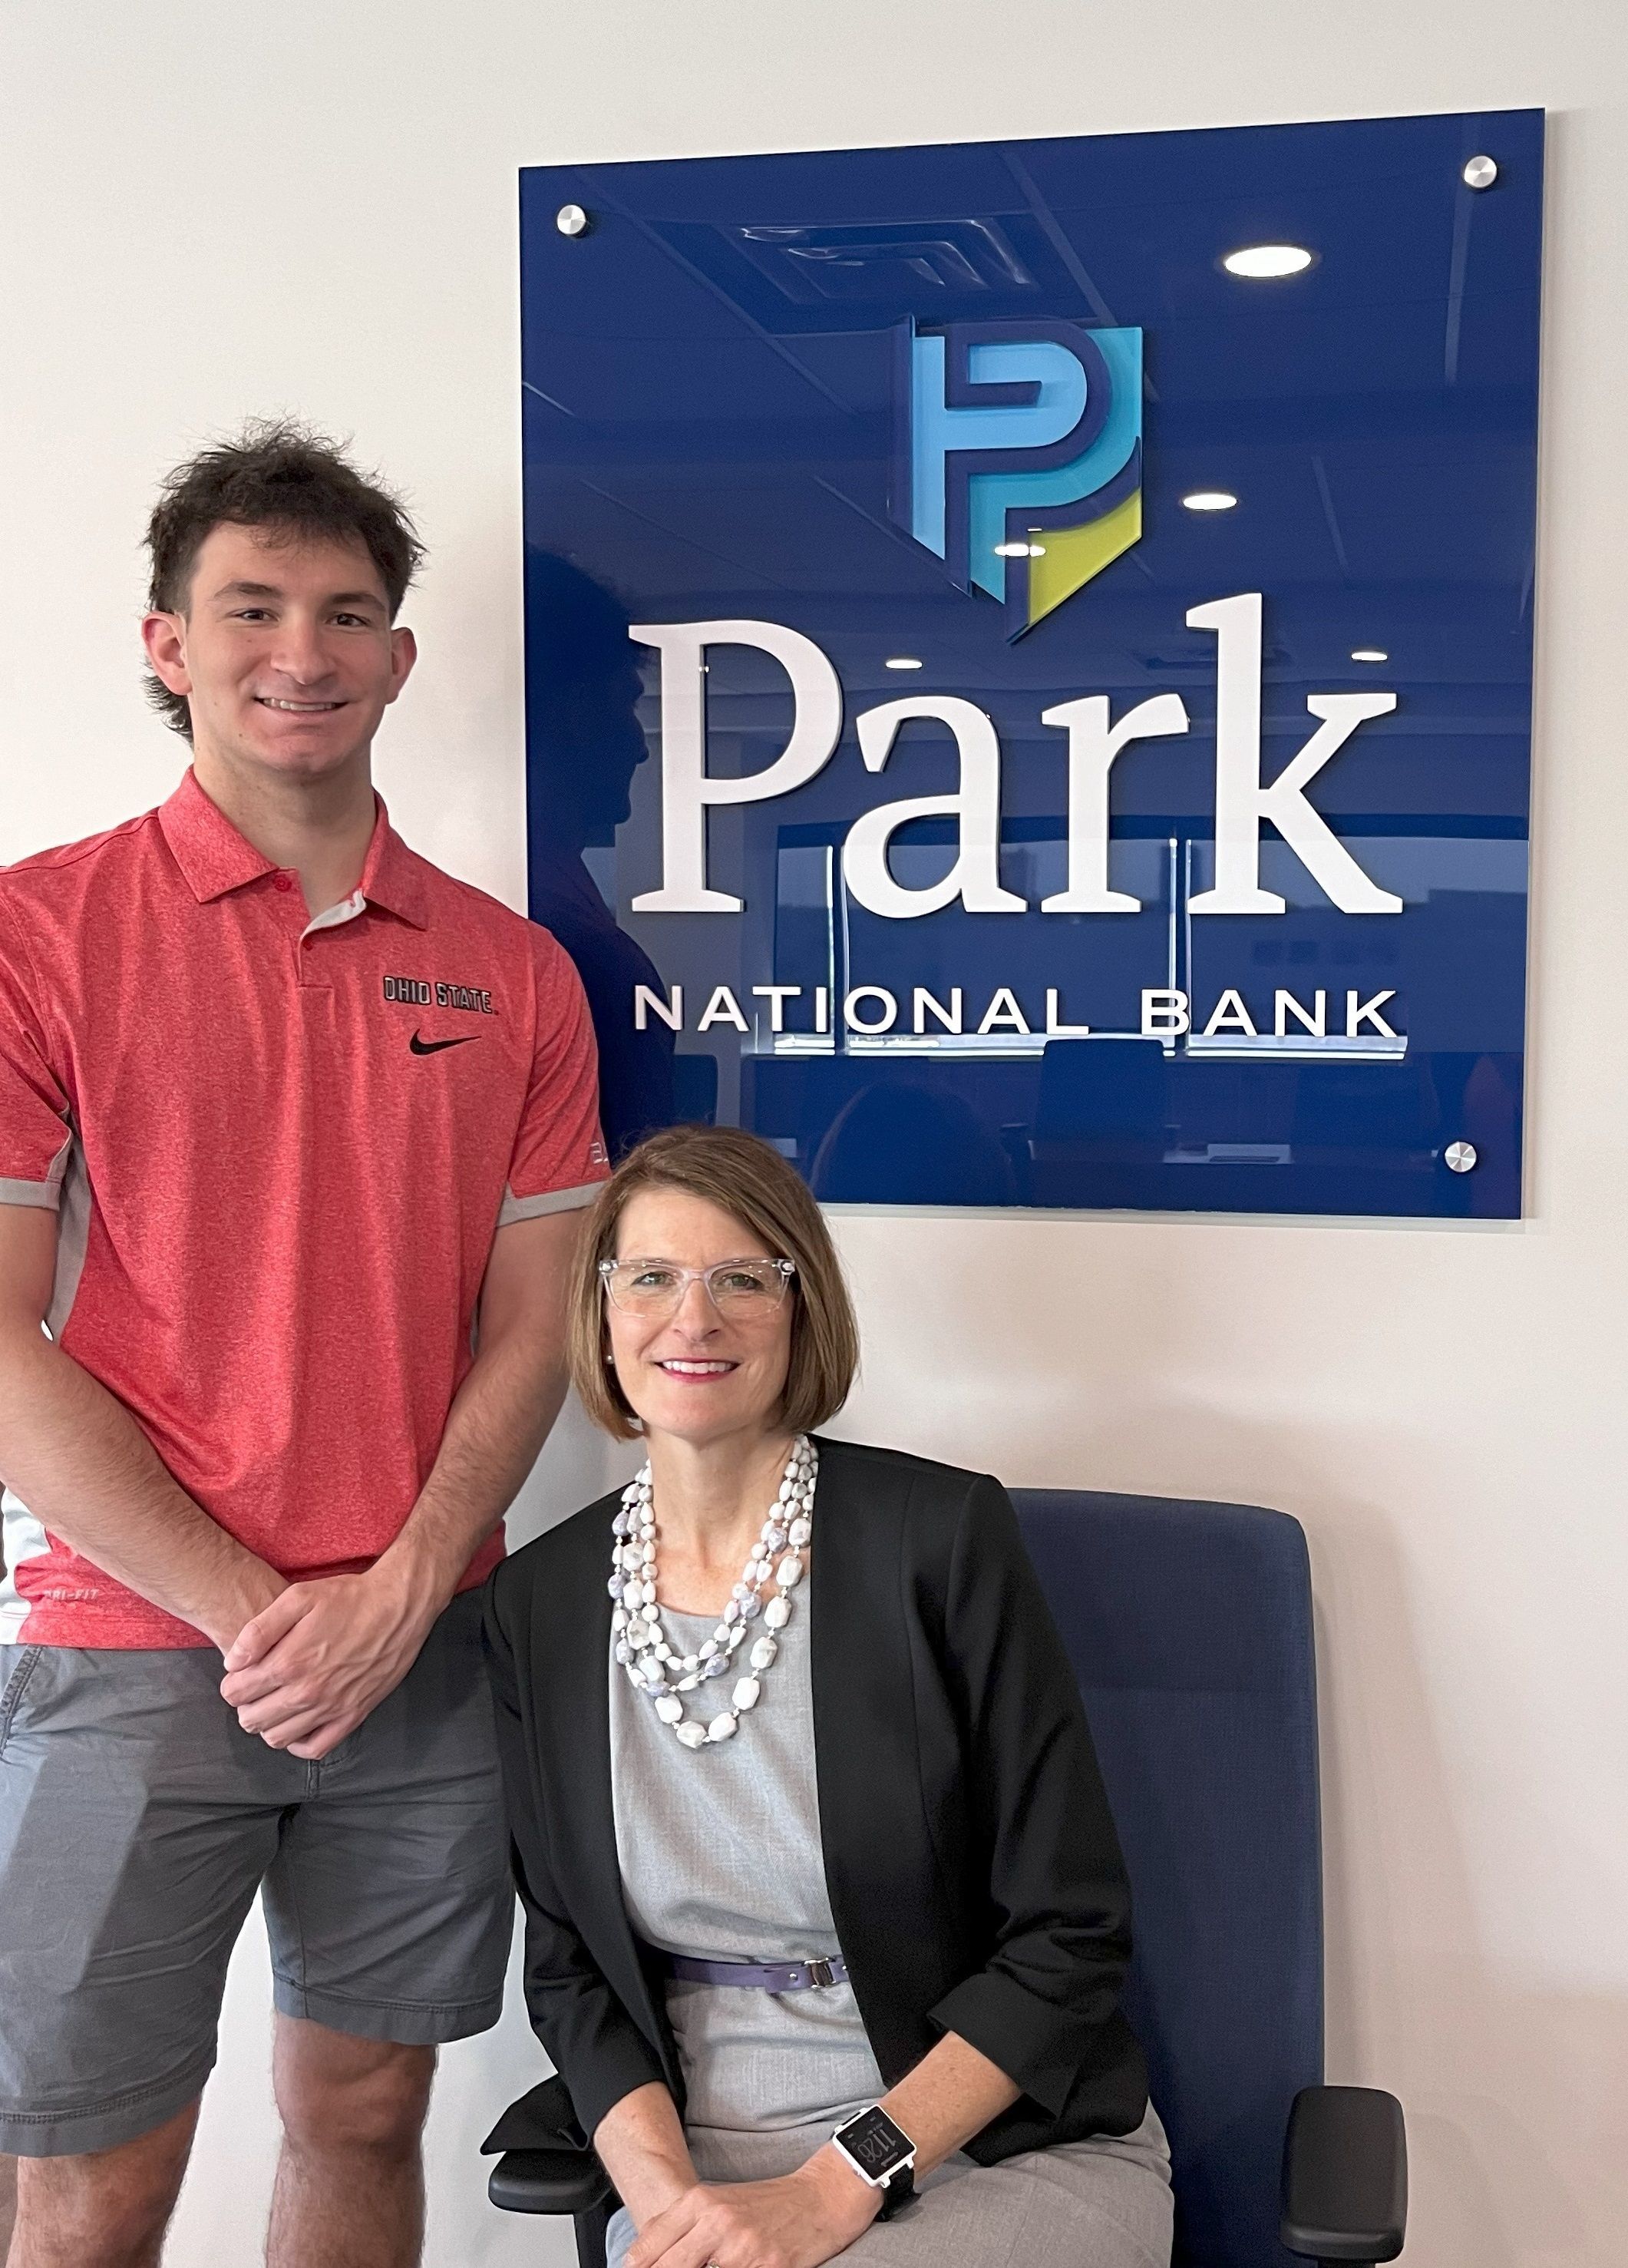 A young man stands beside a seated women in front of a sign that says "Park National Bank"